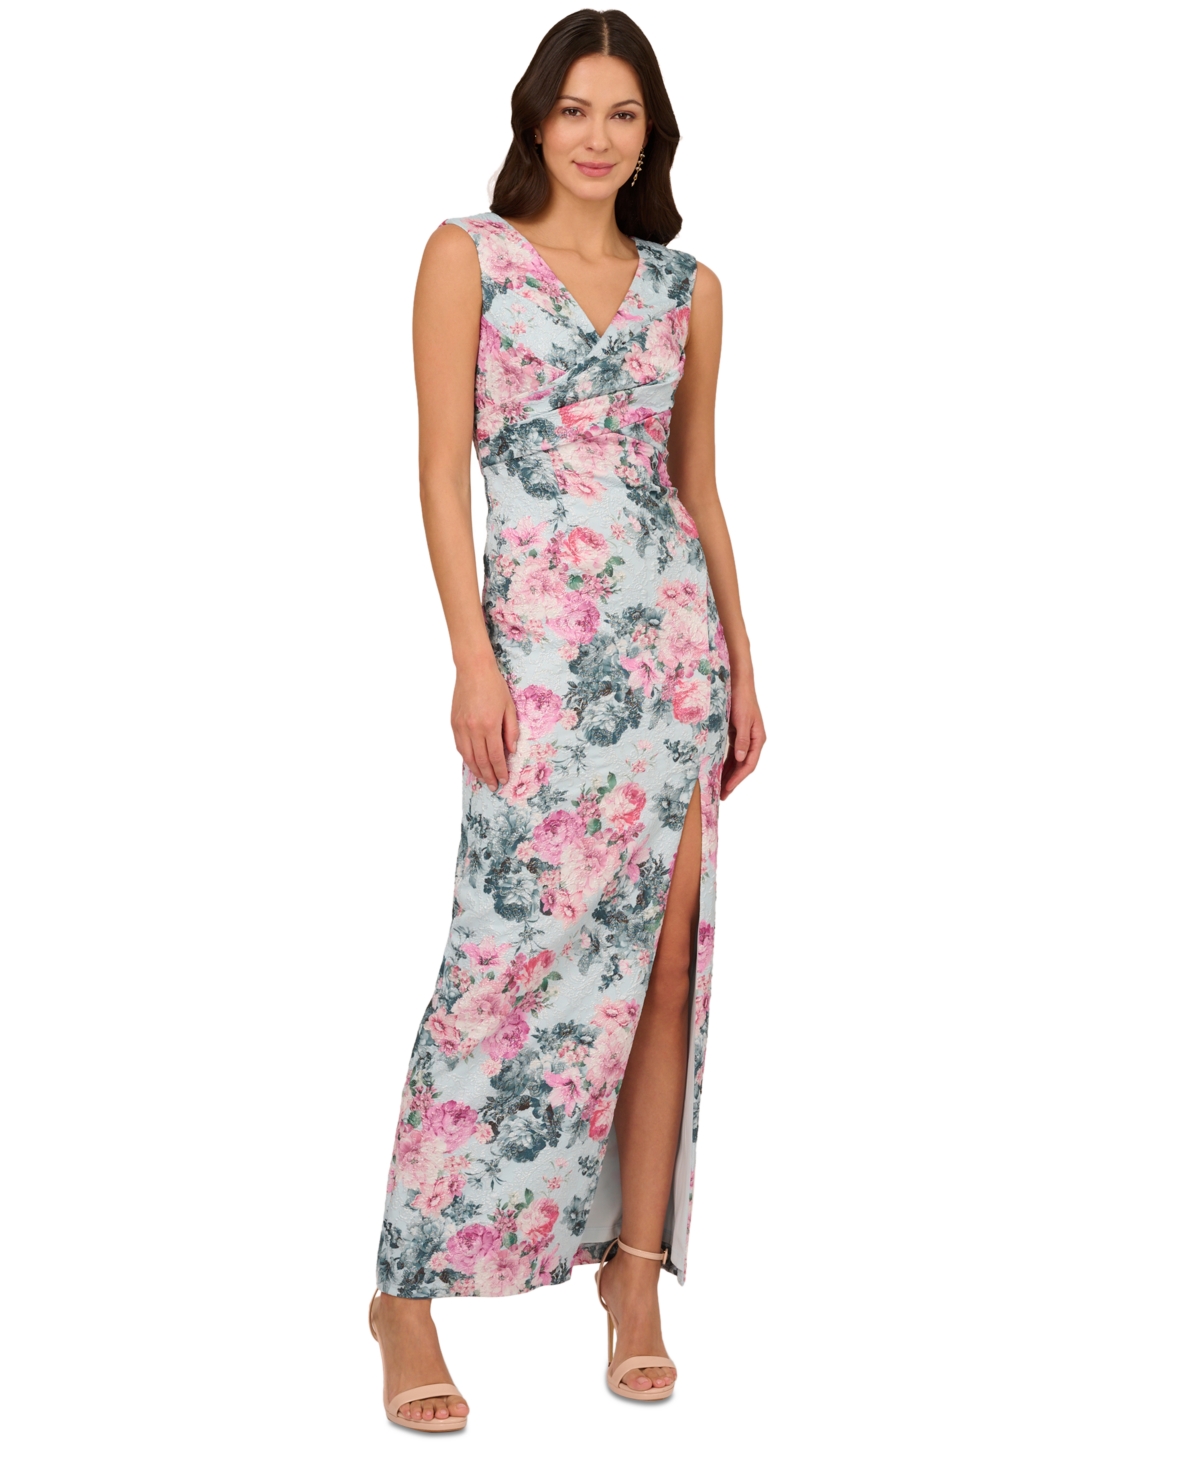 ADRIANNA PAPELL WOMEN'S SLEEVELESS FLORAL JACQUARD GOWN